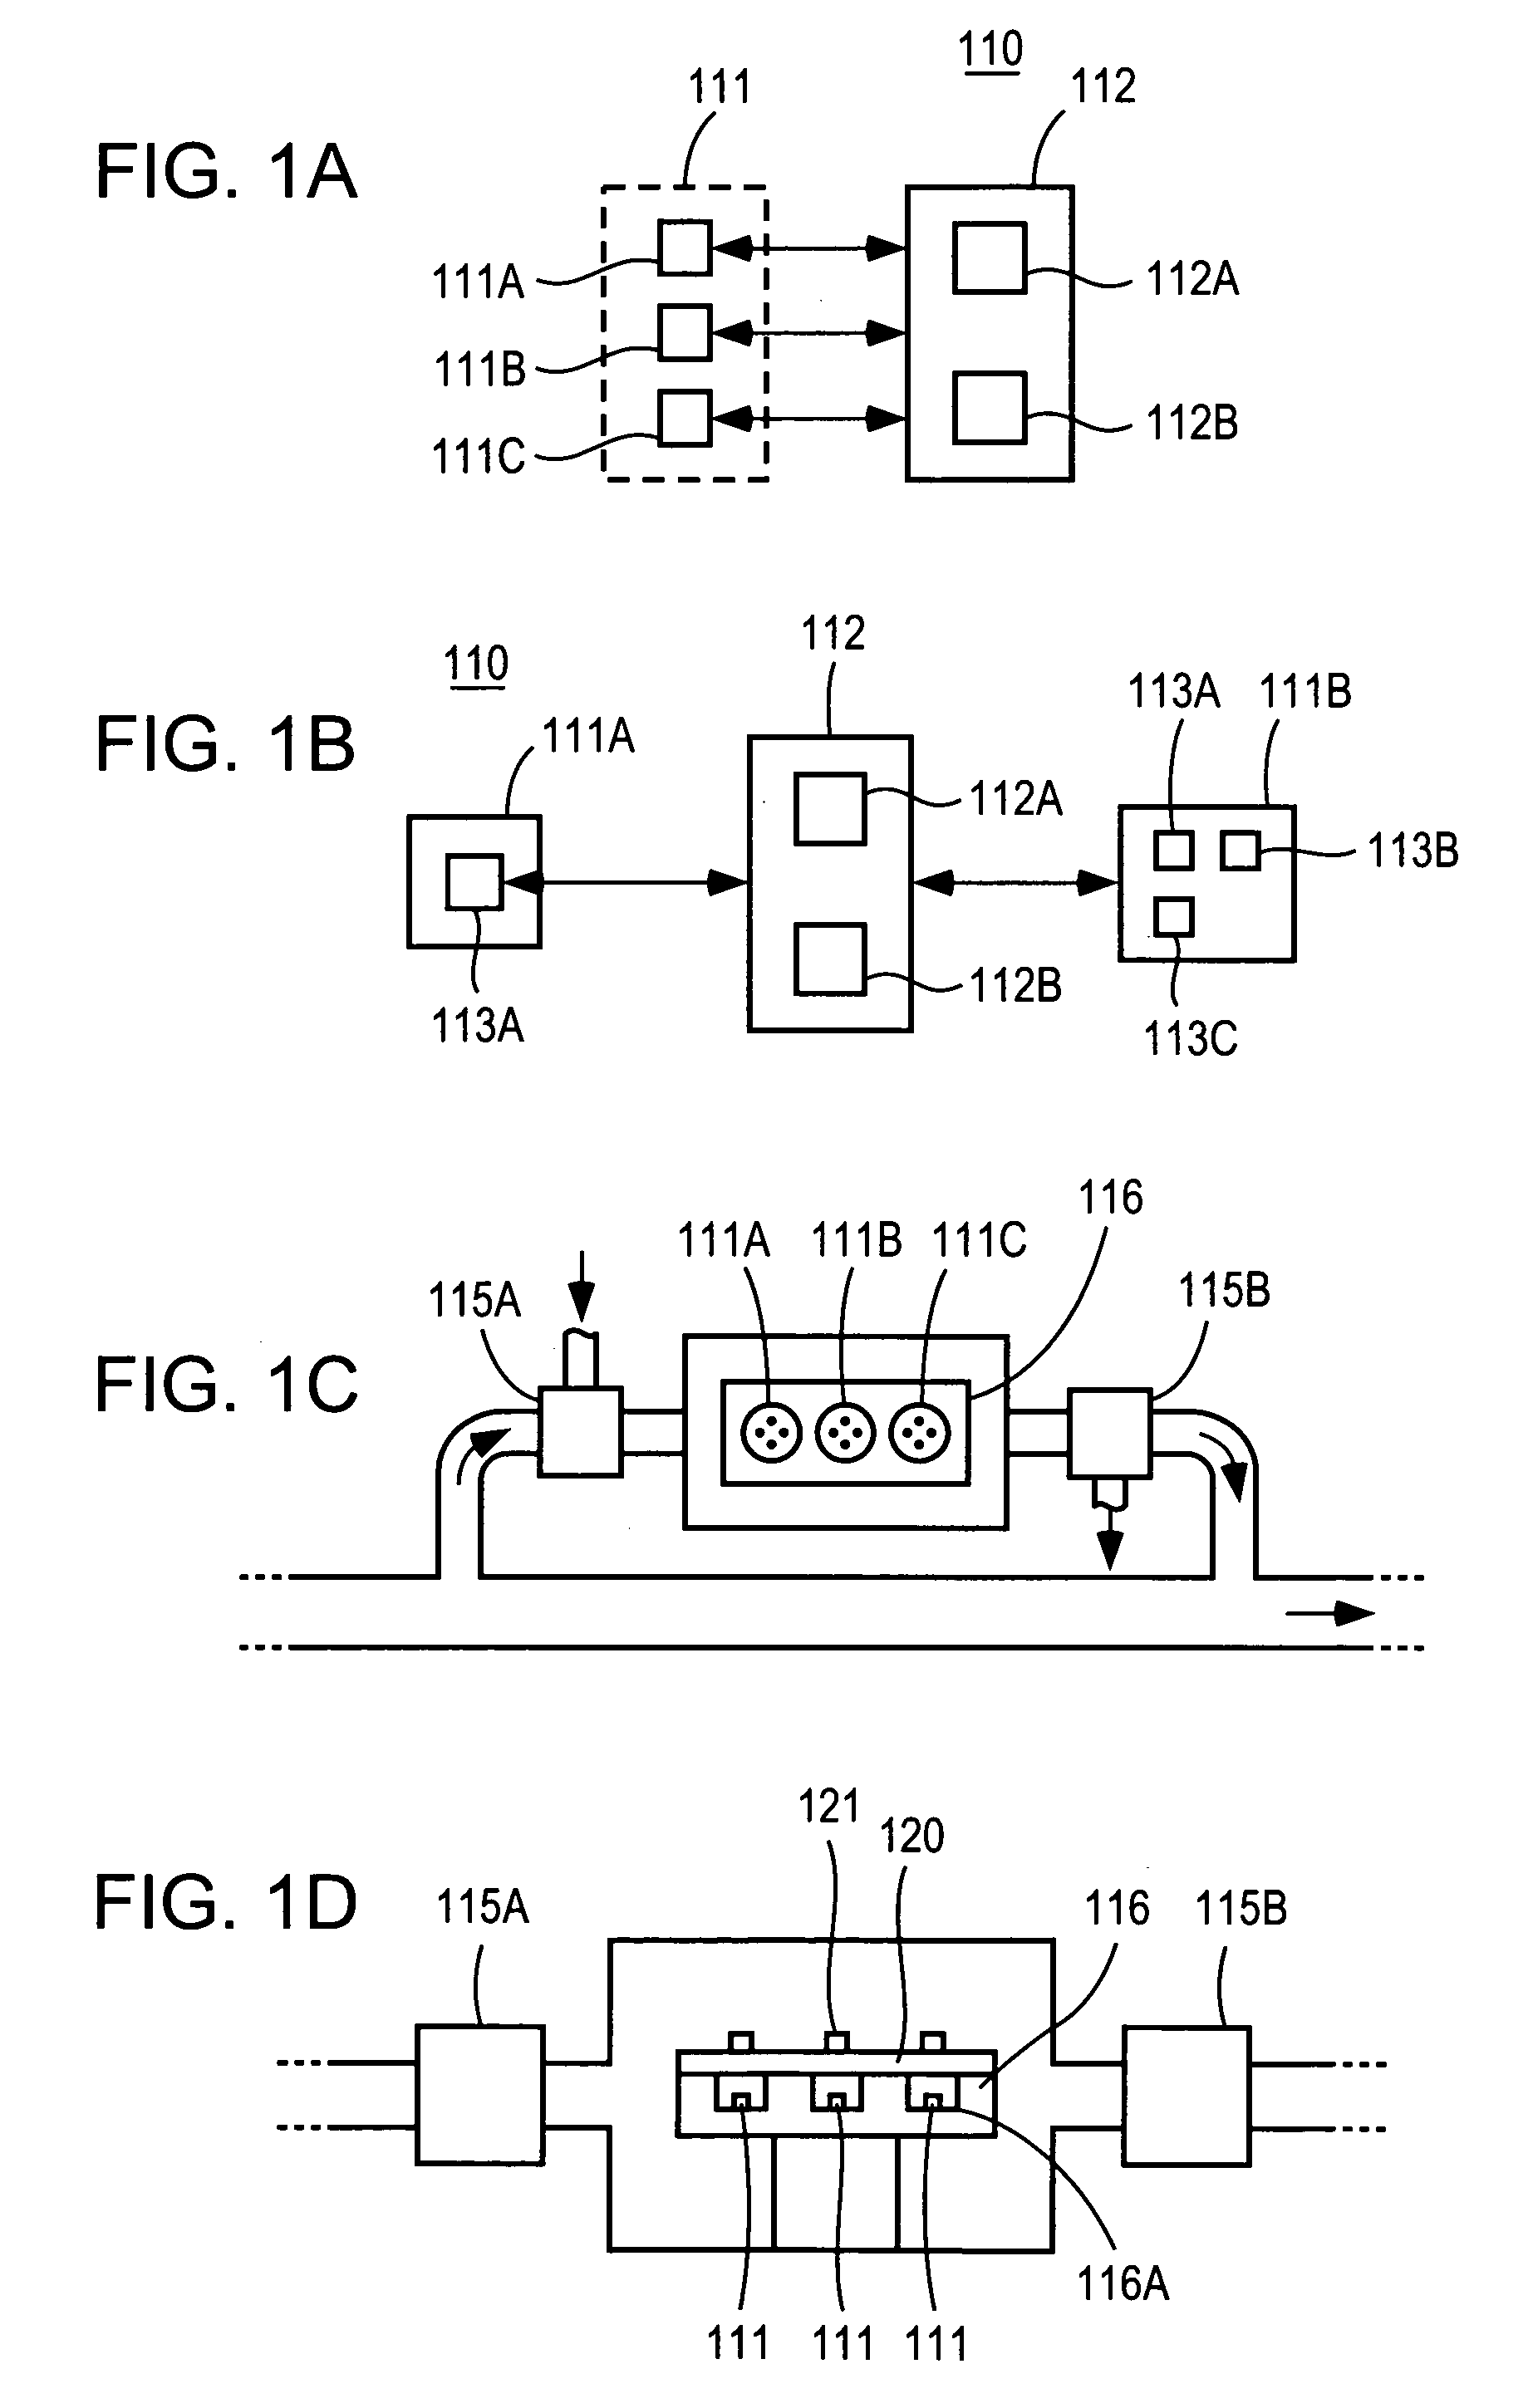 Fluid treatment apparatus with input and output fluid sensing